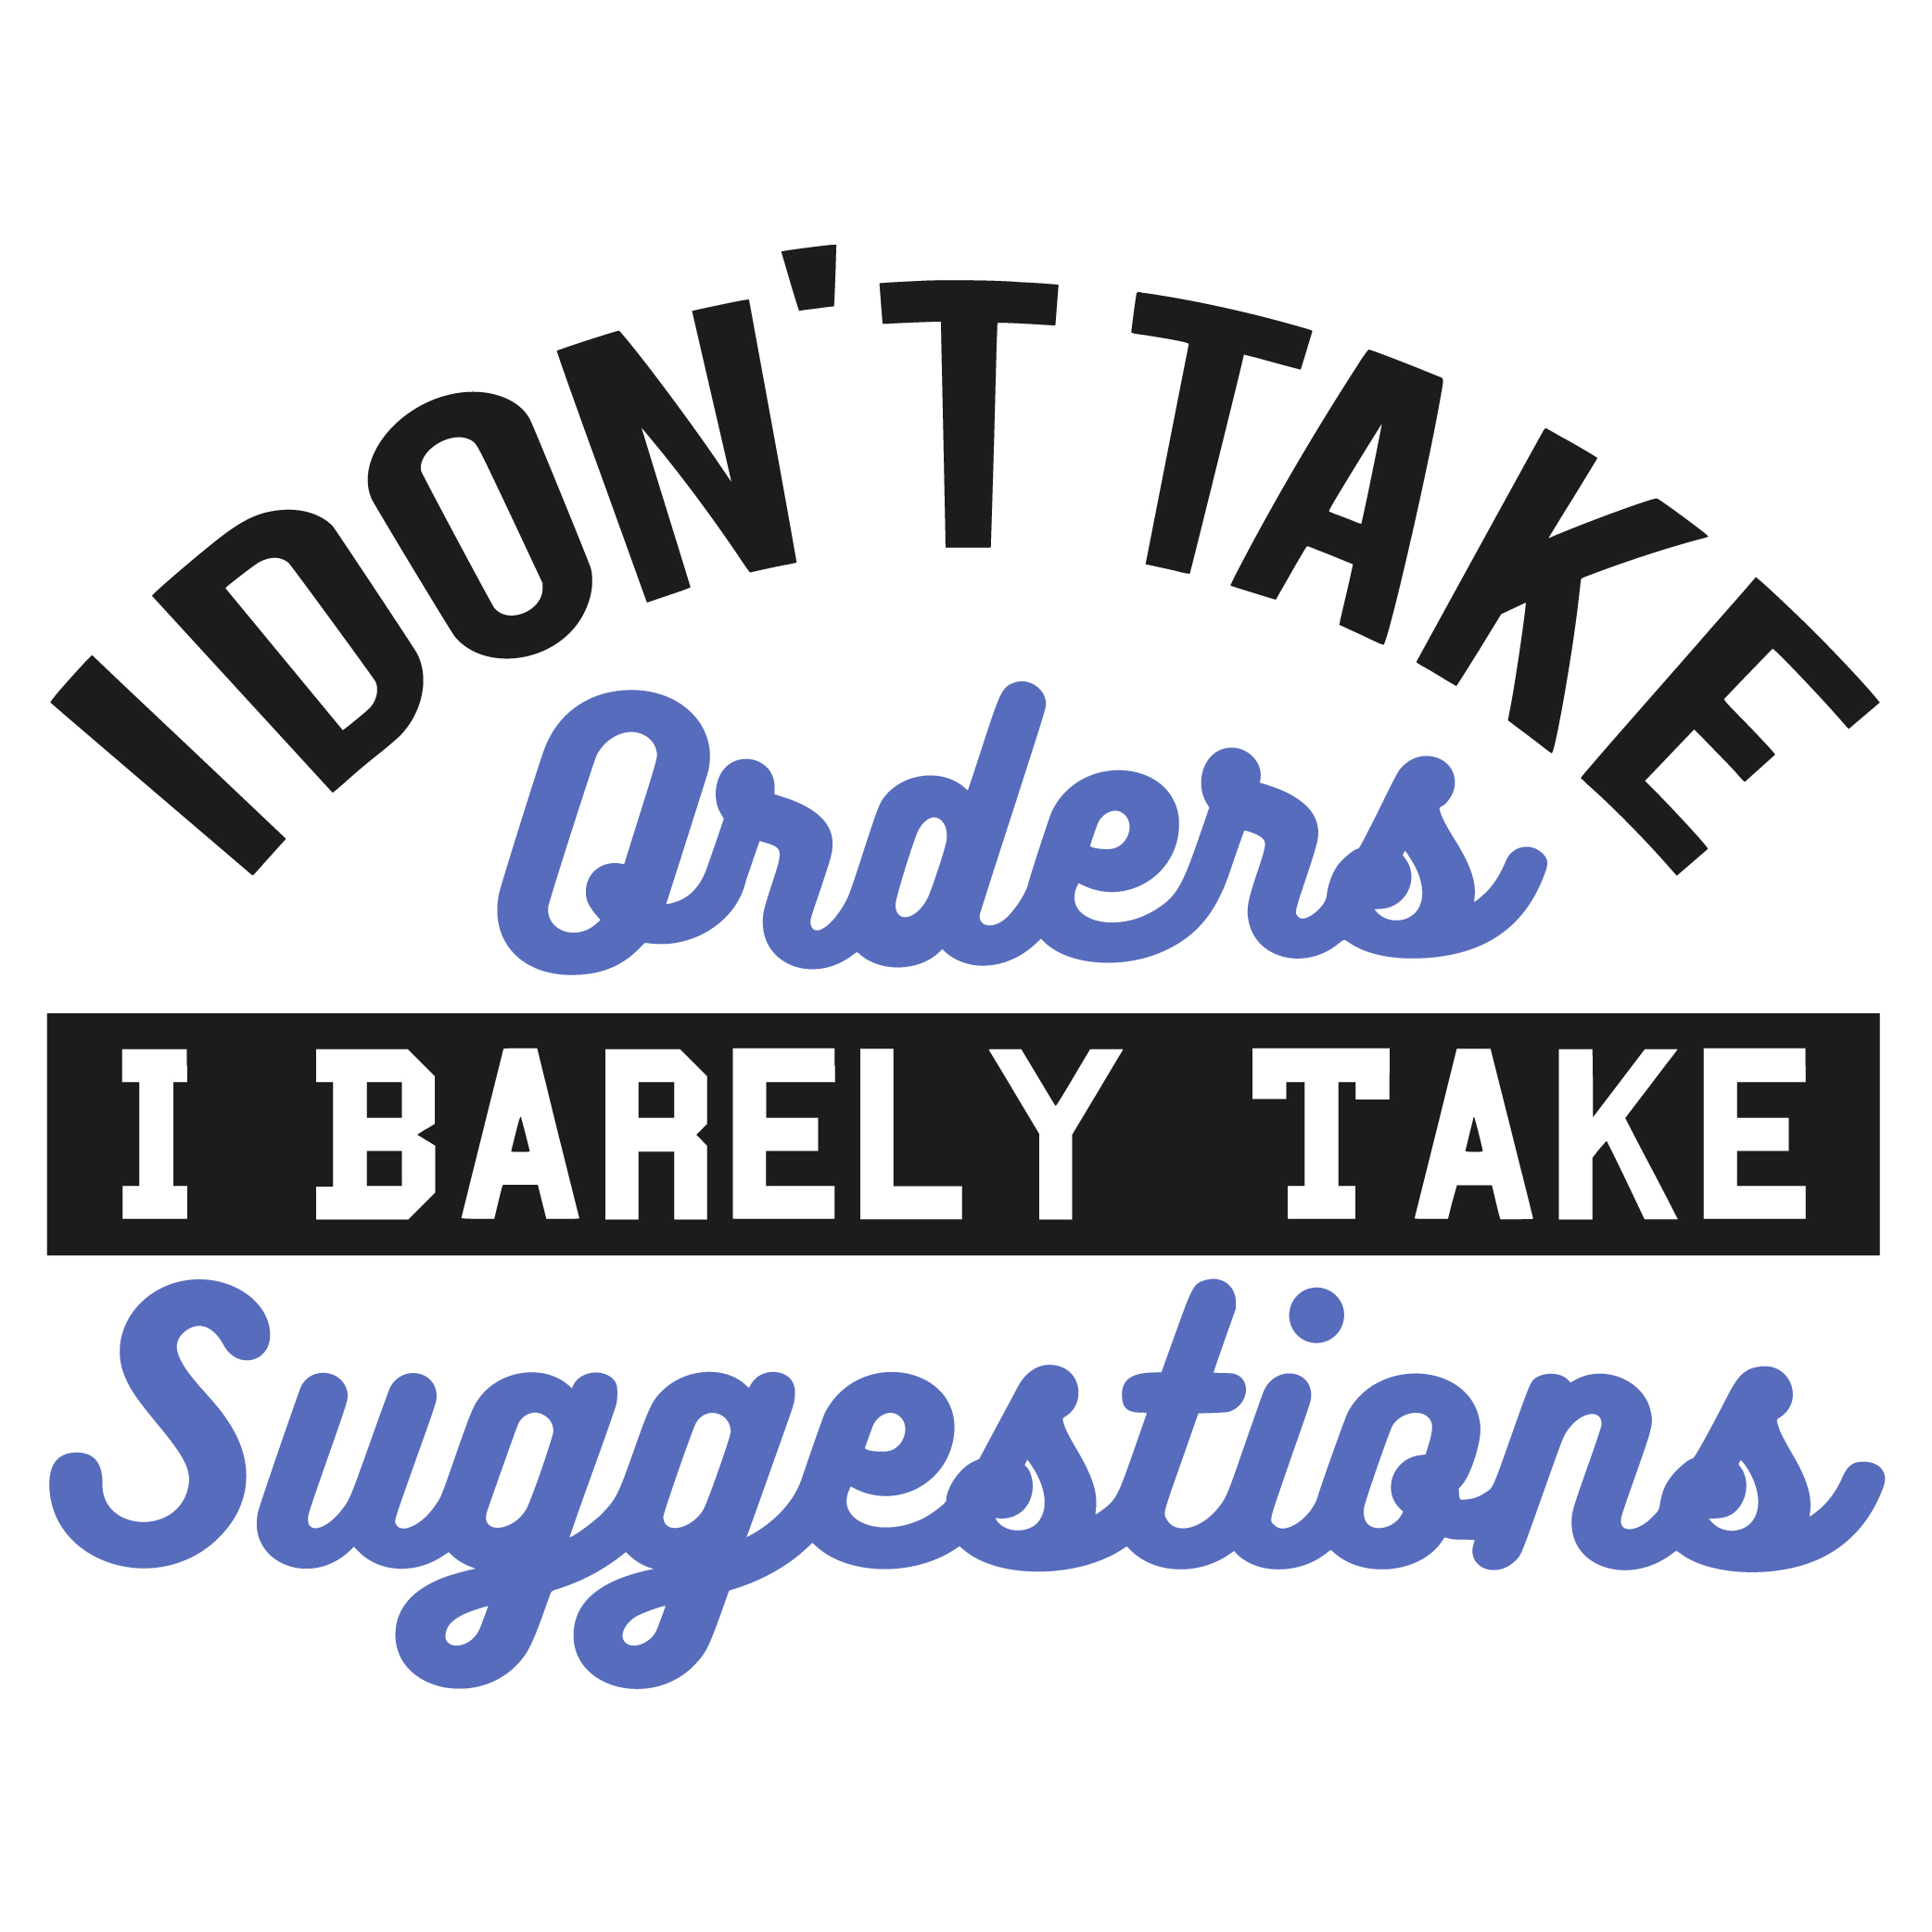 i dont take orders i barely take suggestions woman SVG Boss Lady  Black Lives Matter  Lady Woman Diva Tshirt Cut File Cricut Silhouette Women Empowerment svg Feminism svg Girl Power 